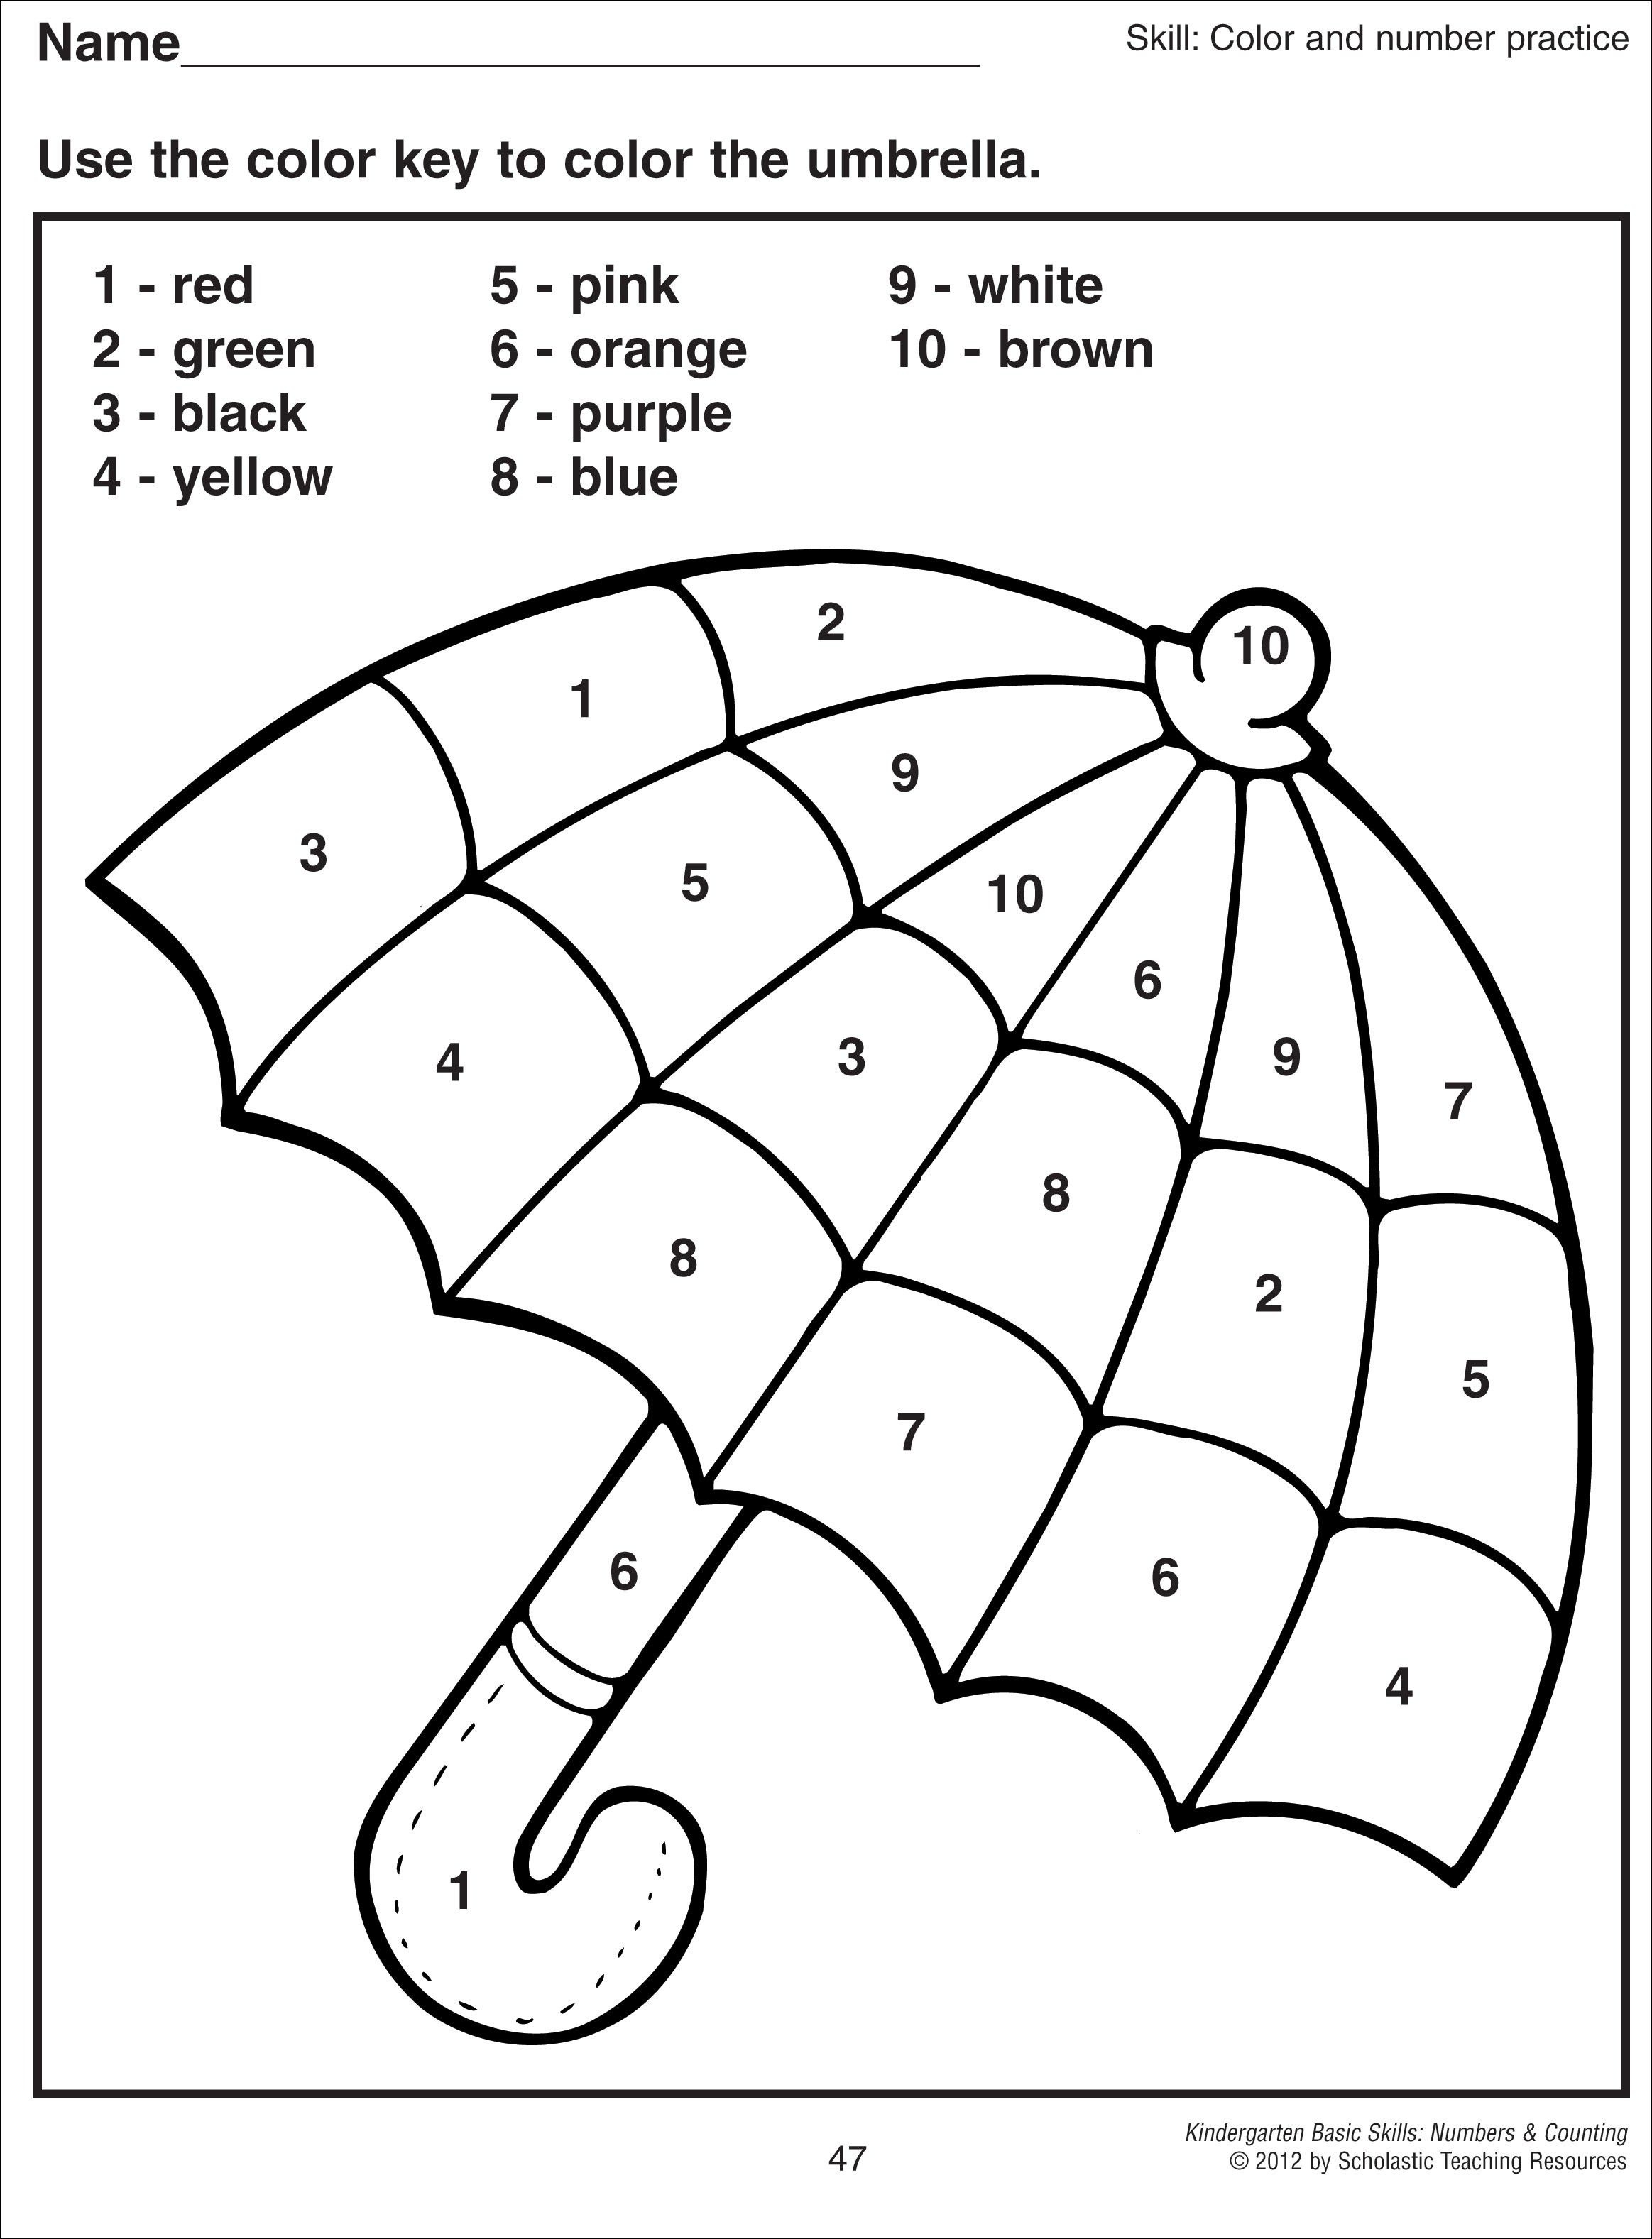 Colornumber Kindergarten : Free Coloring Pages - Coloring Pages - Free Printable Pages For Preschoolers